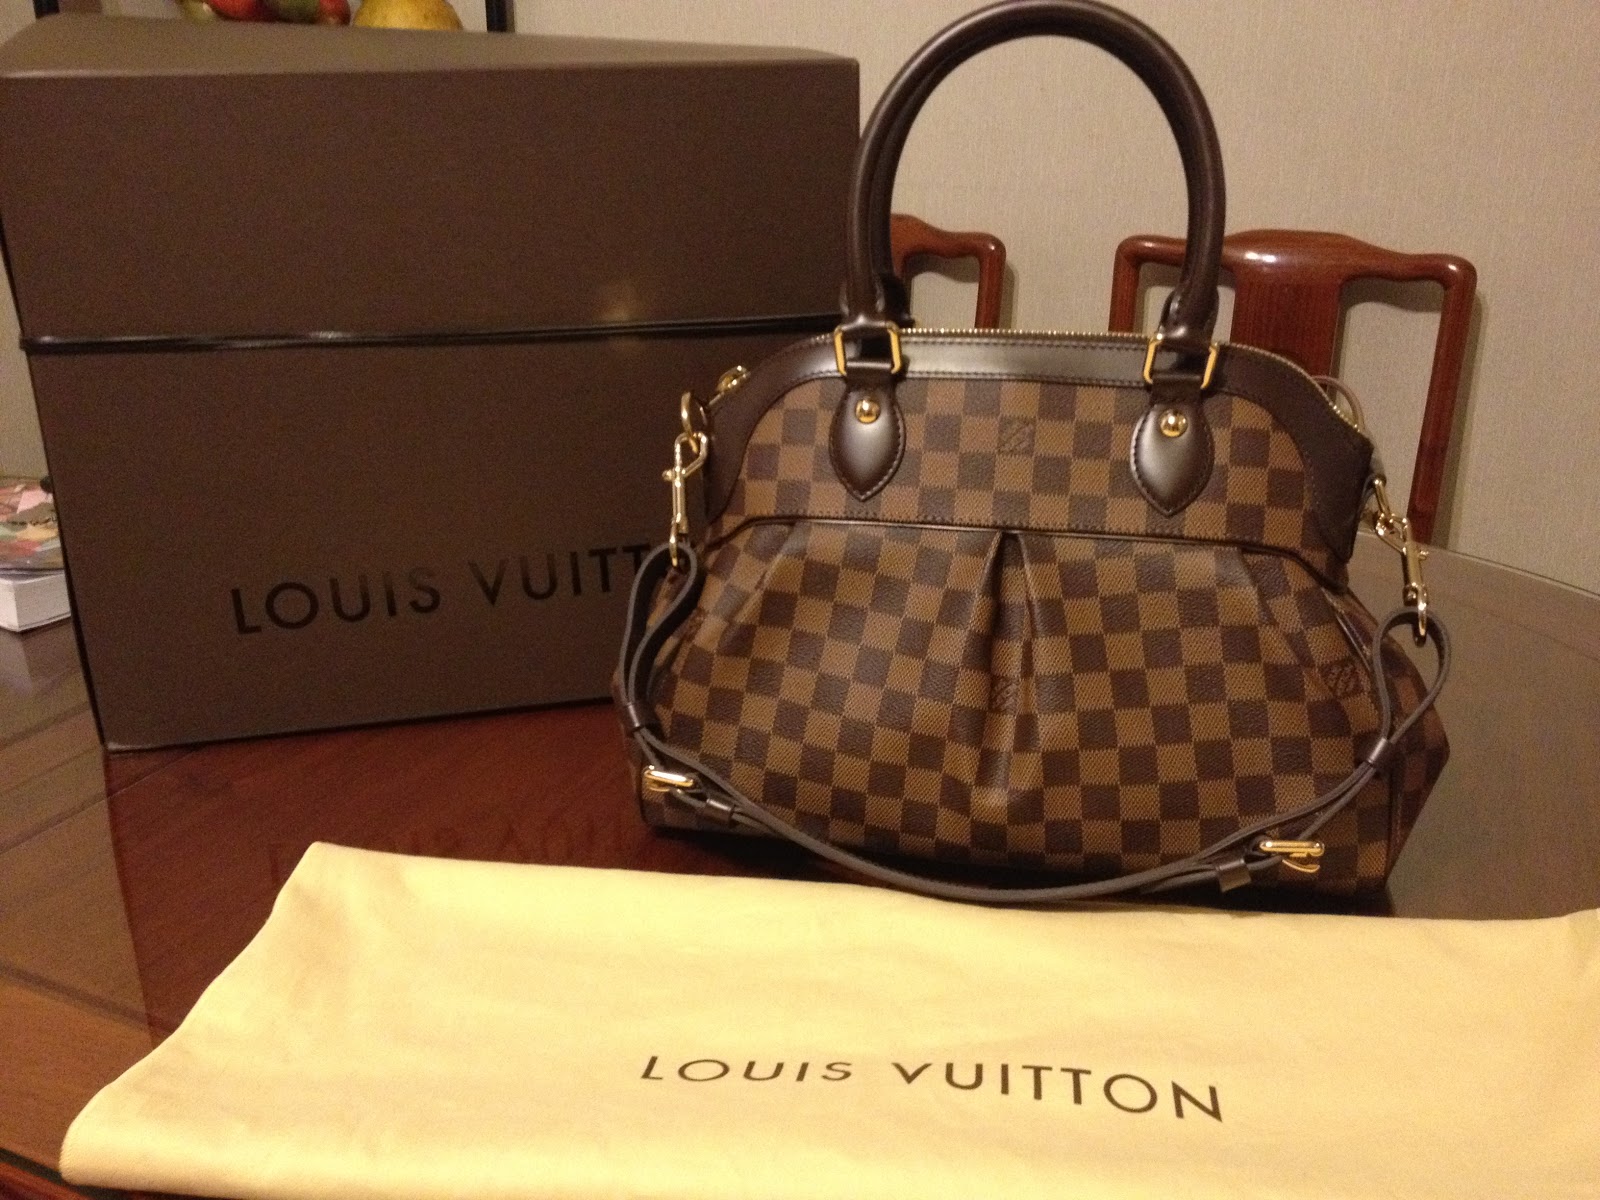 all things fashion, handbags, www.neverfullmm.com me : Louis Vuitton Trevi PM; my review on this ...